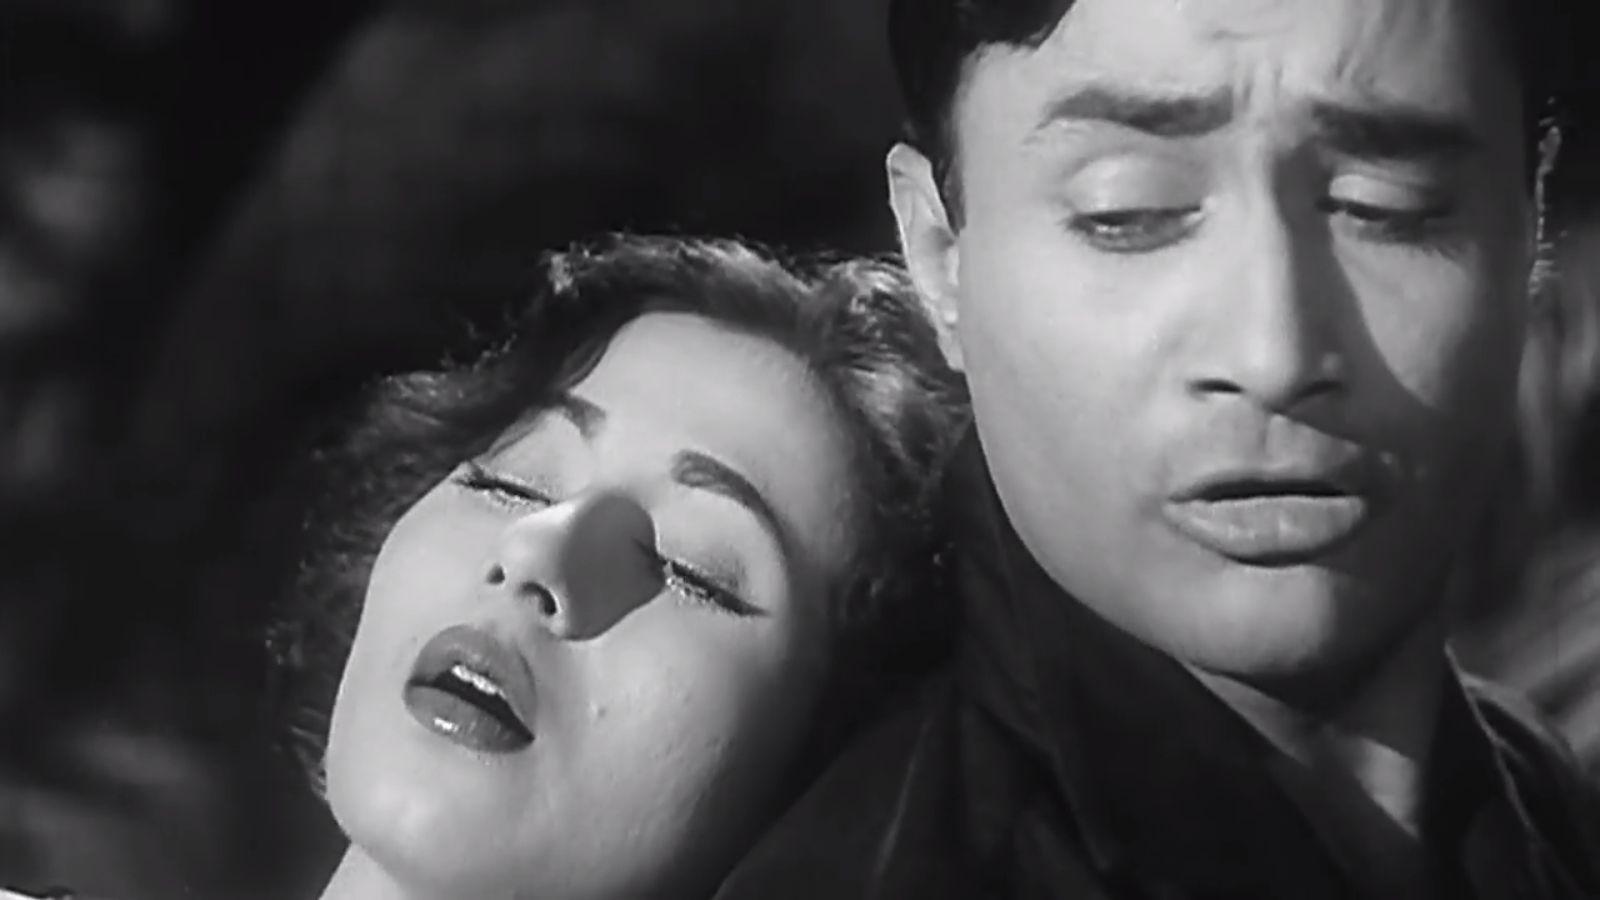 Remembering Bollywood Legends: Dev Anand remembers Madhubala